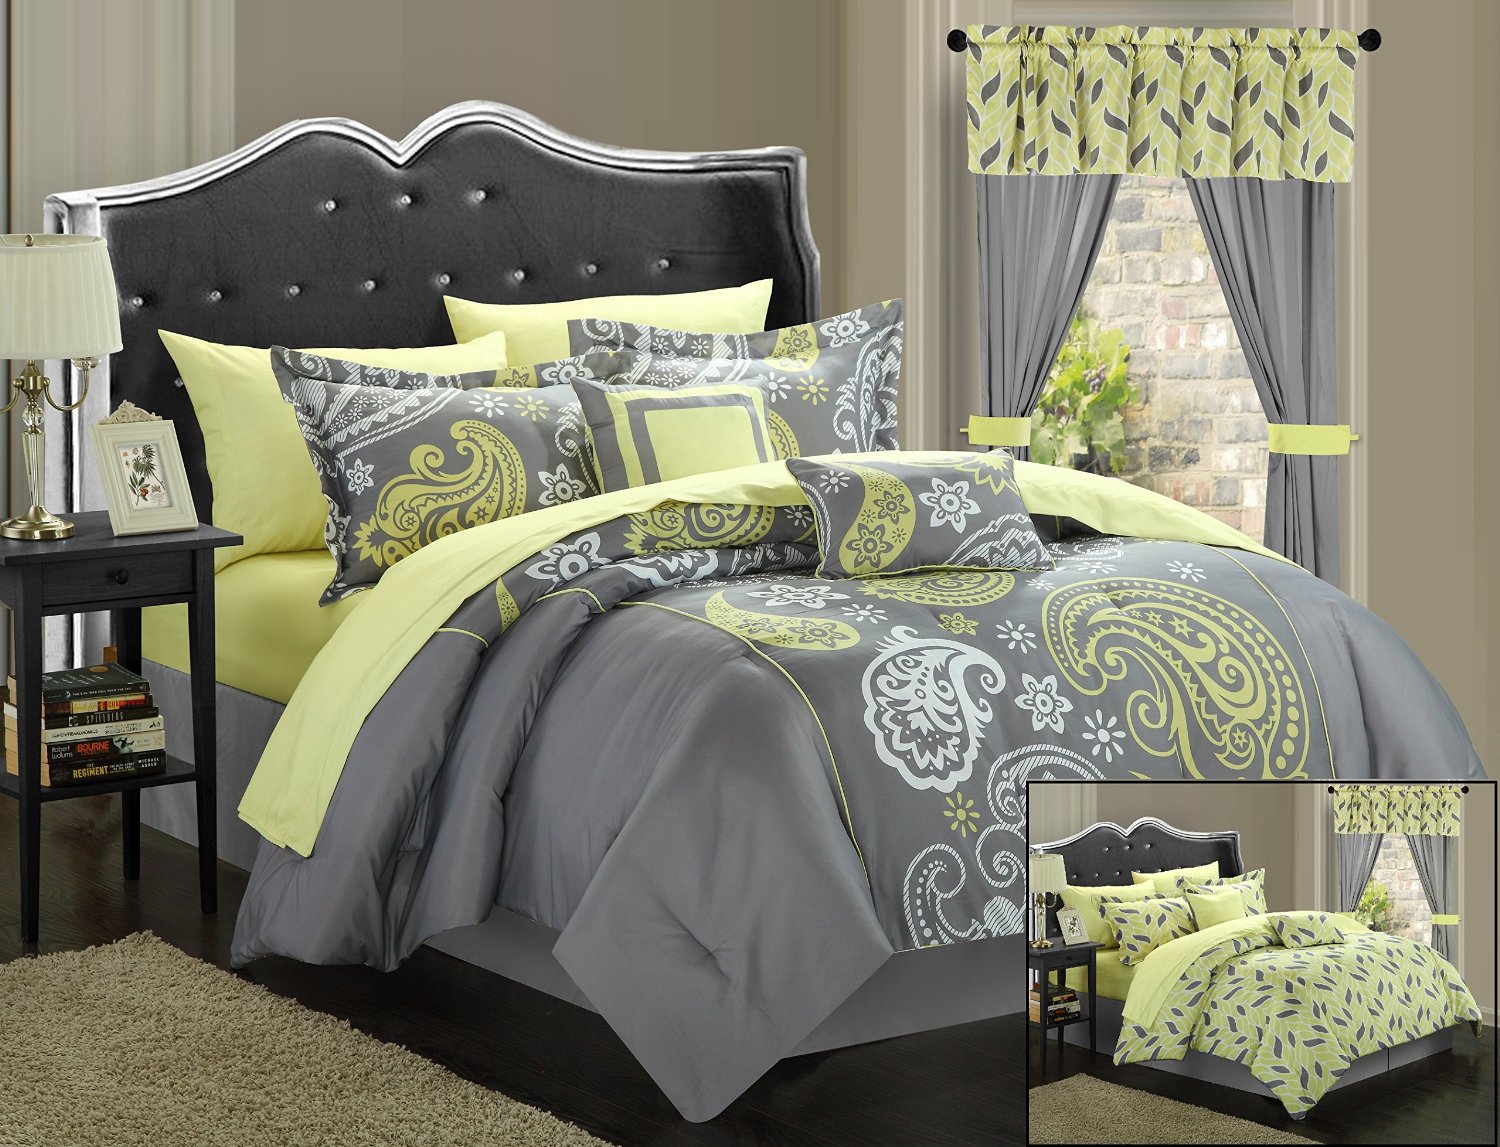  Yellow  and Grey  Comforter Sets and Bedding